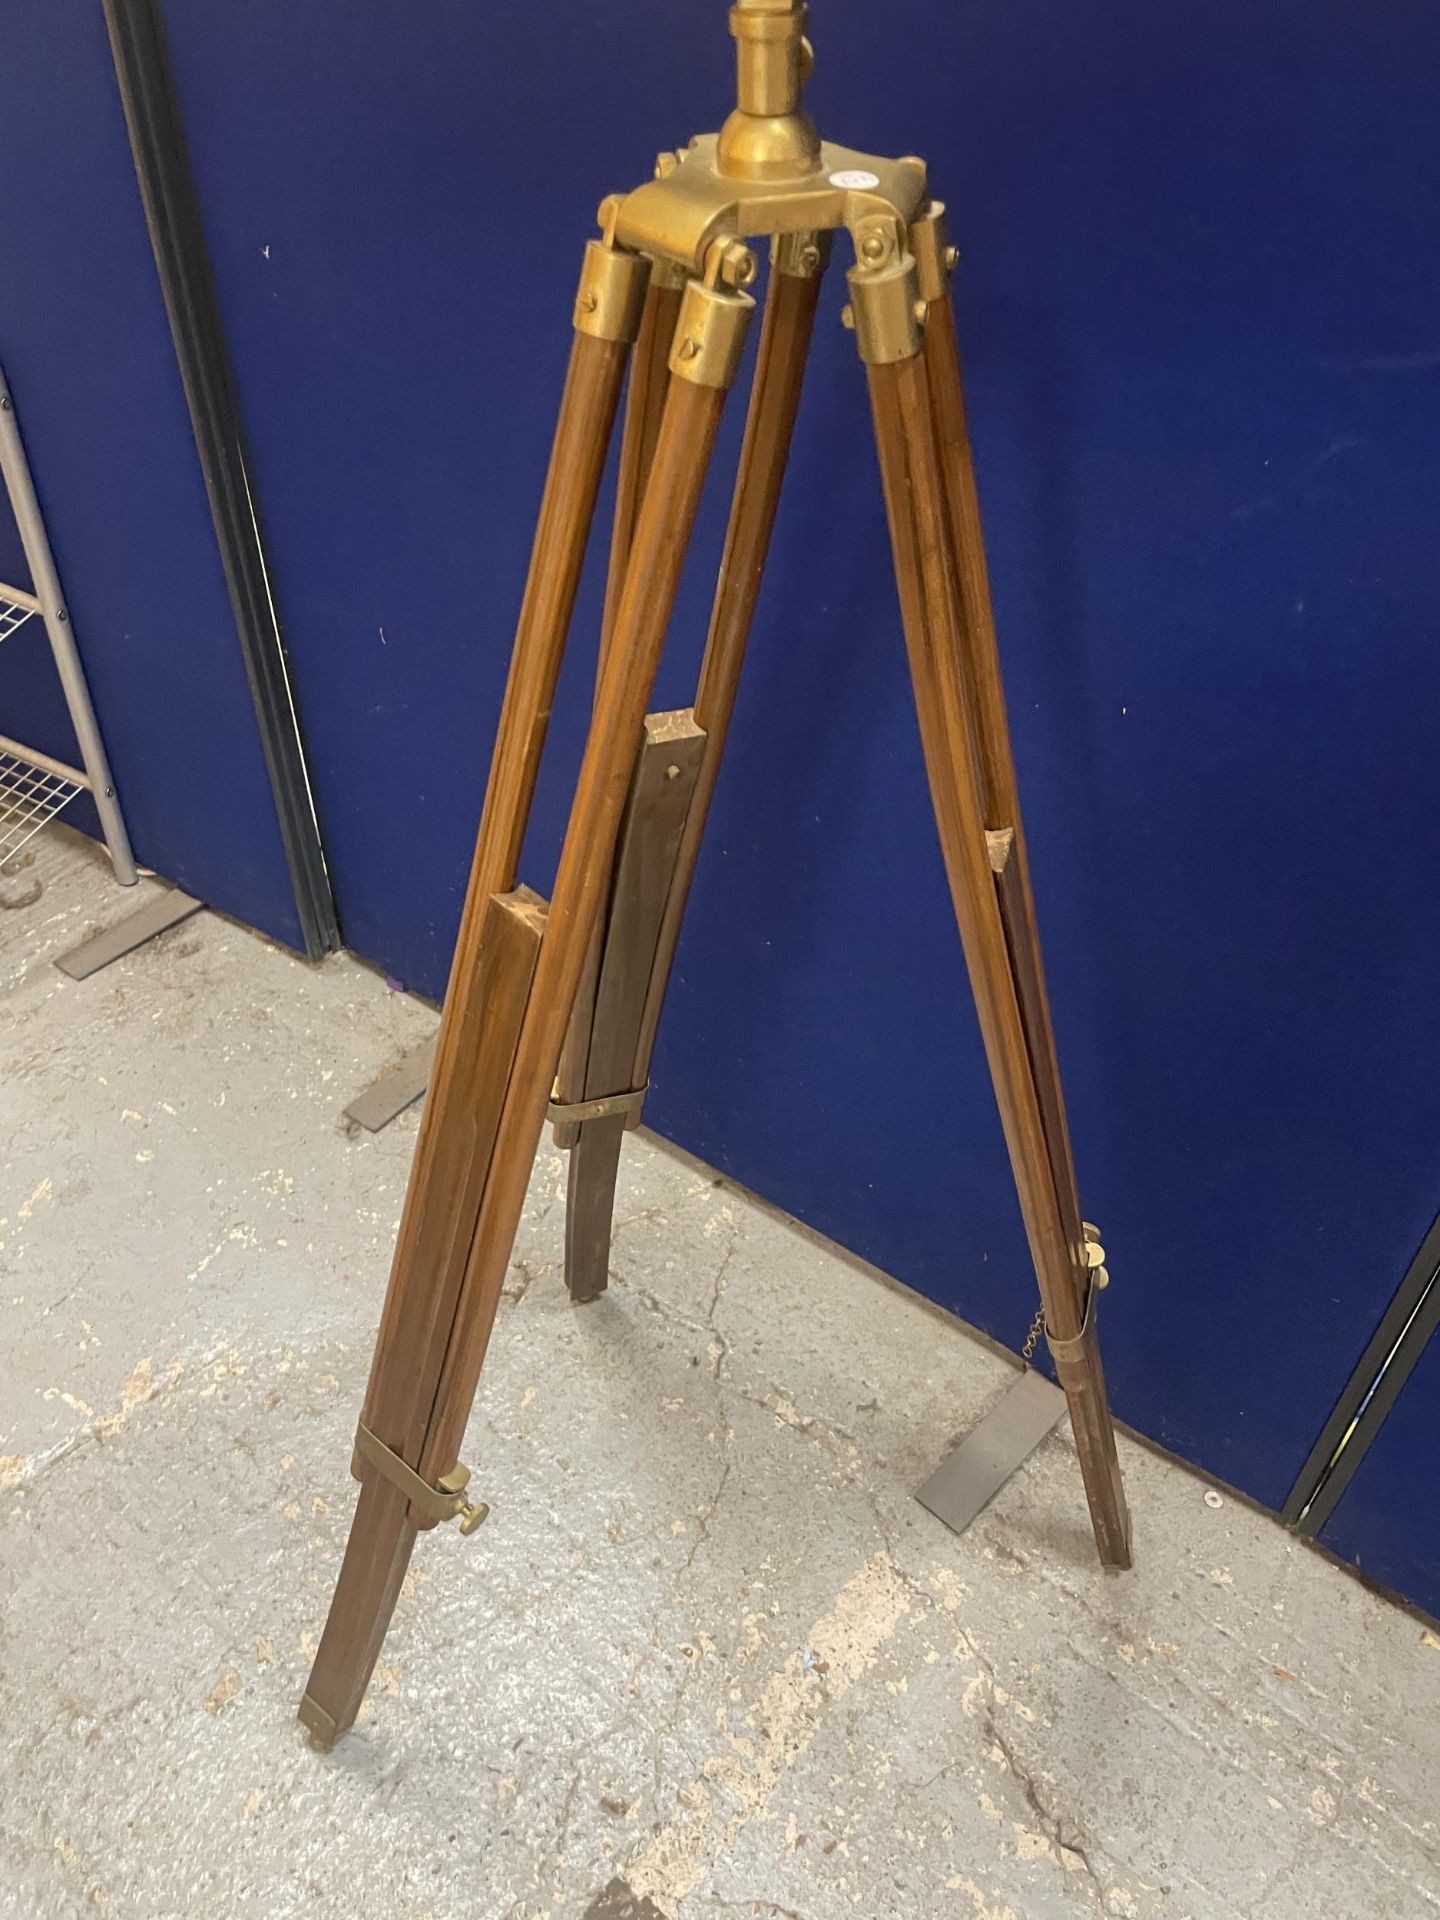 A BRASS TELESCOPE ON AN ADJUSTABLE TRIPOD STAND - Image 4 of 4